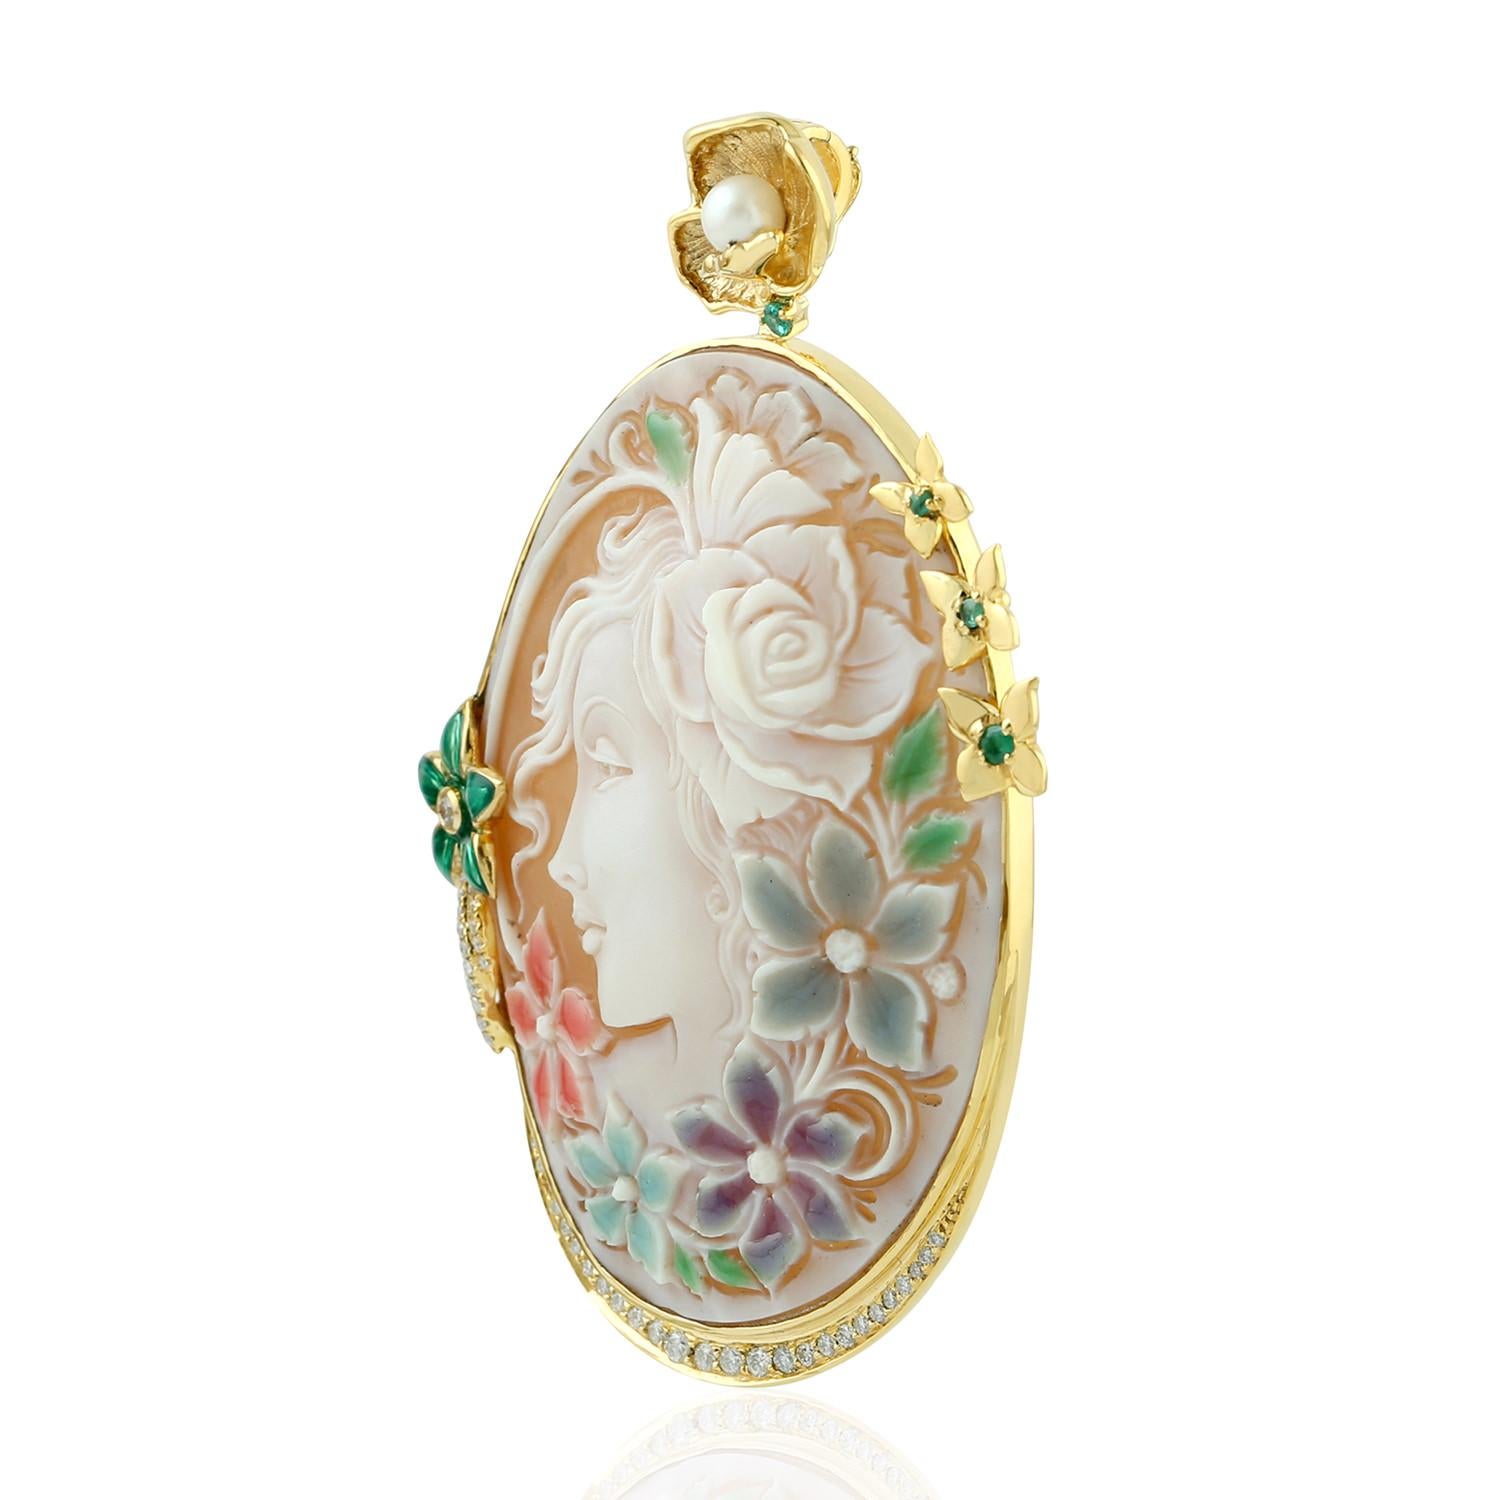 Cast in 18 karat gold. This beautiful cameo pendant necklace is set with 58.16 carats cameo shell, .16 carats emerald, .97 carats pearl and .50 carats of sparkling diamonds. Also available matching earrings.

FOLLOW  MEGHNA JEWELS storefront to view